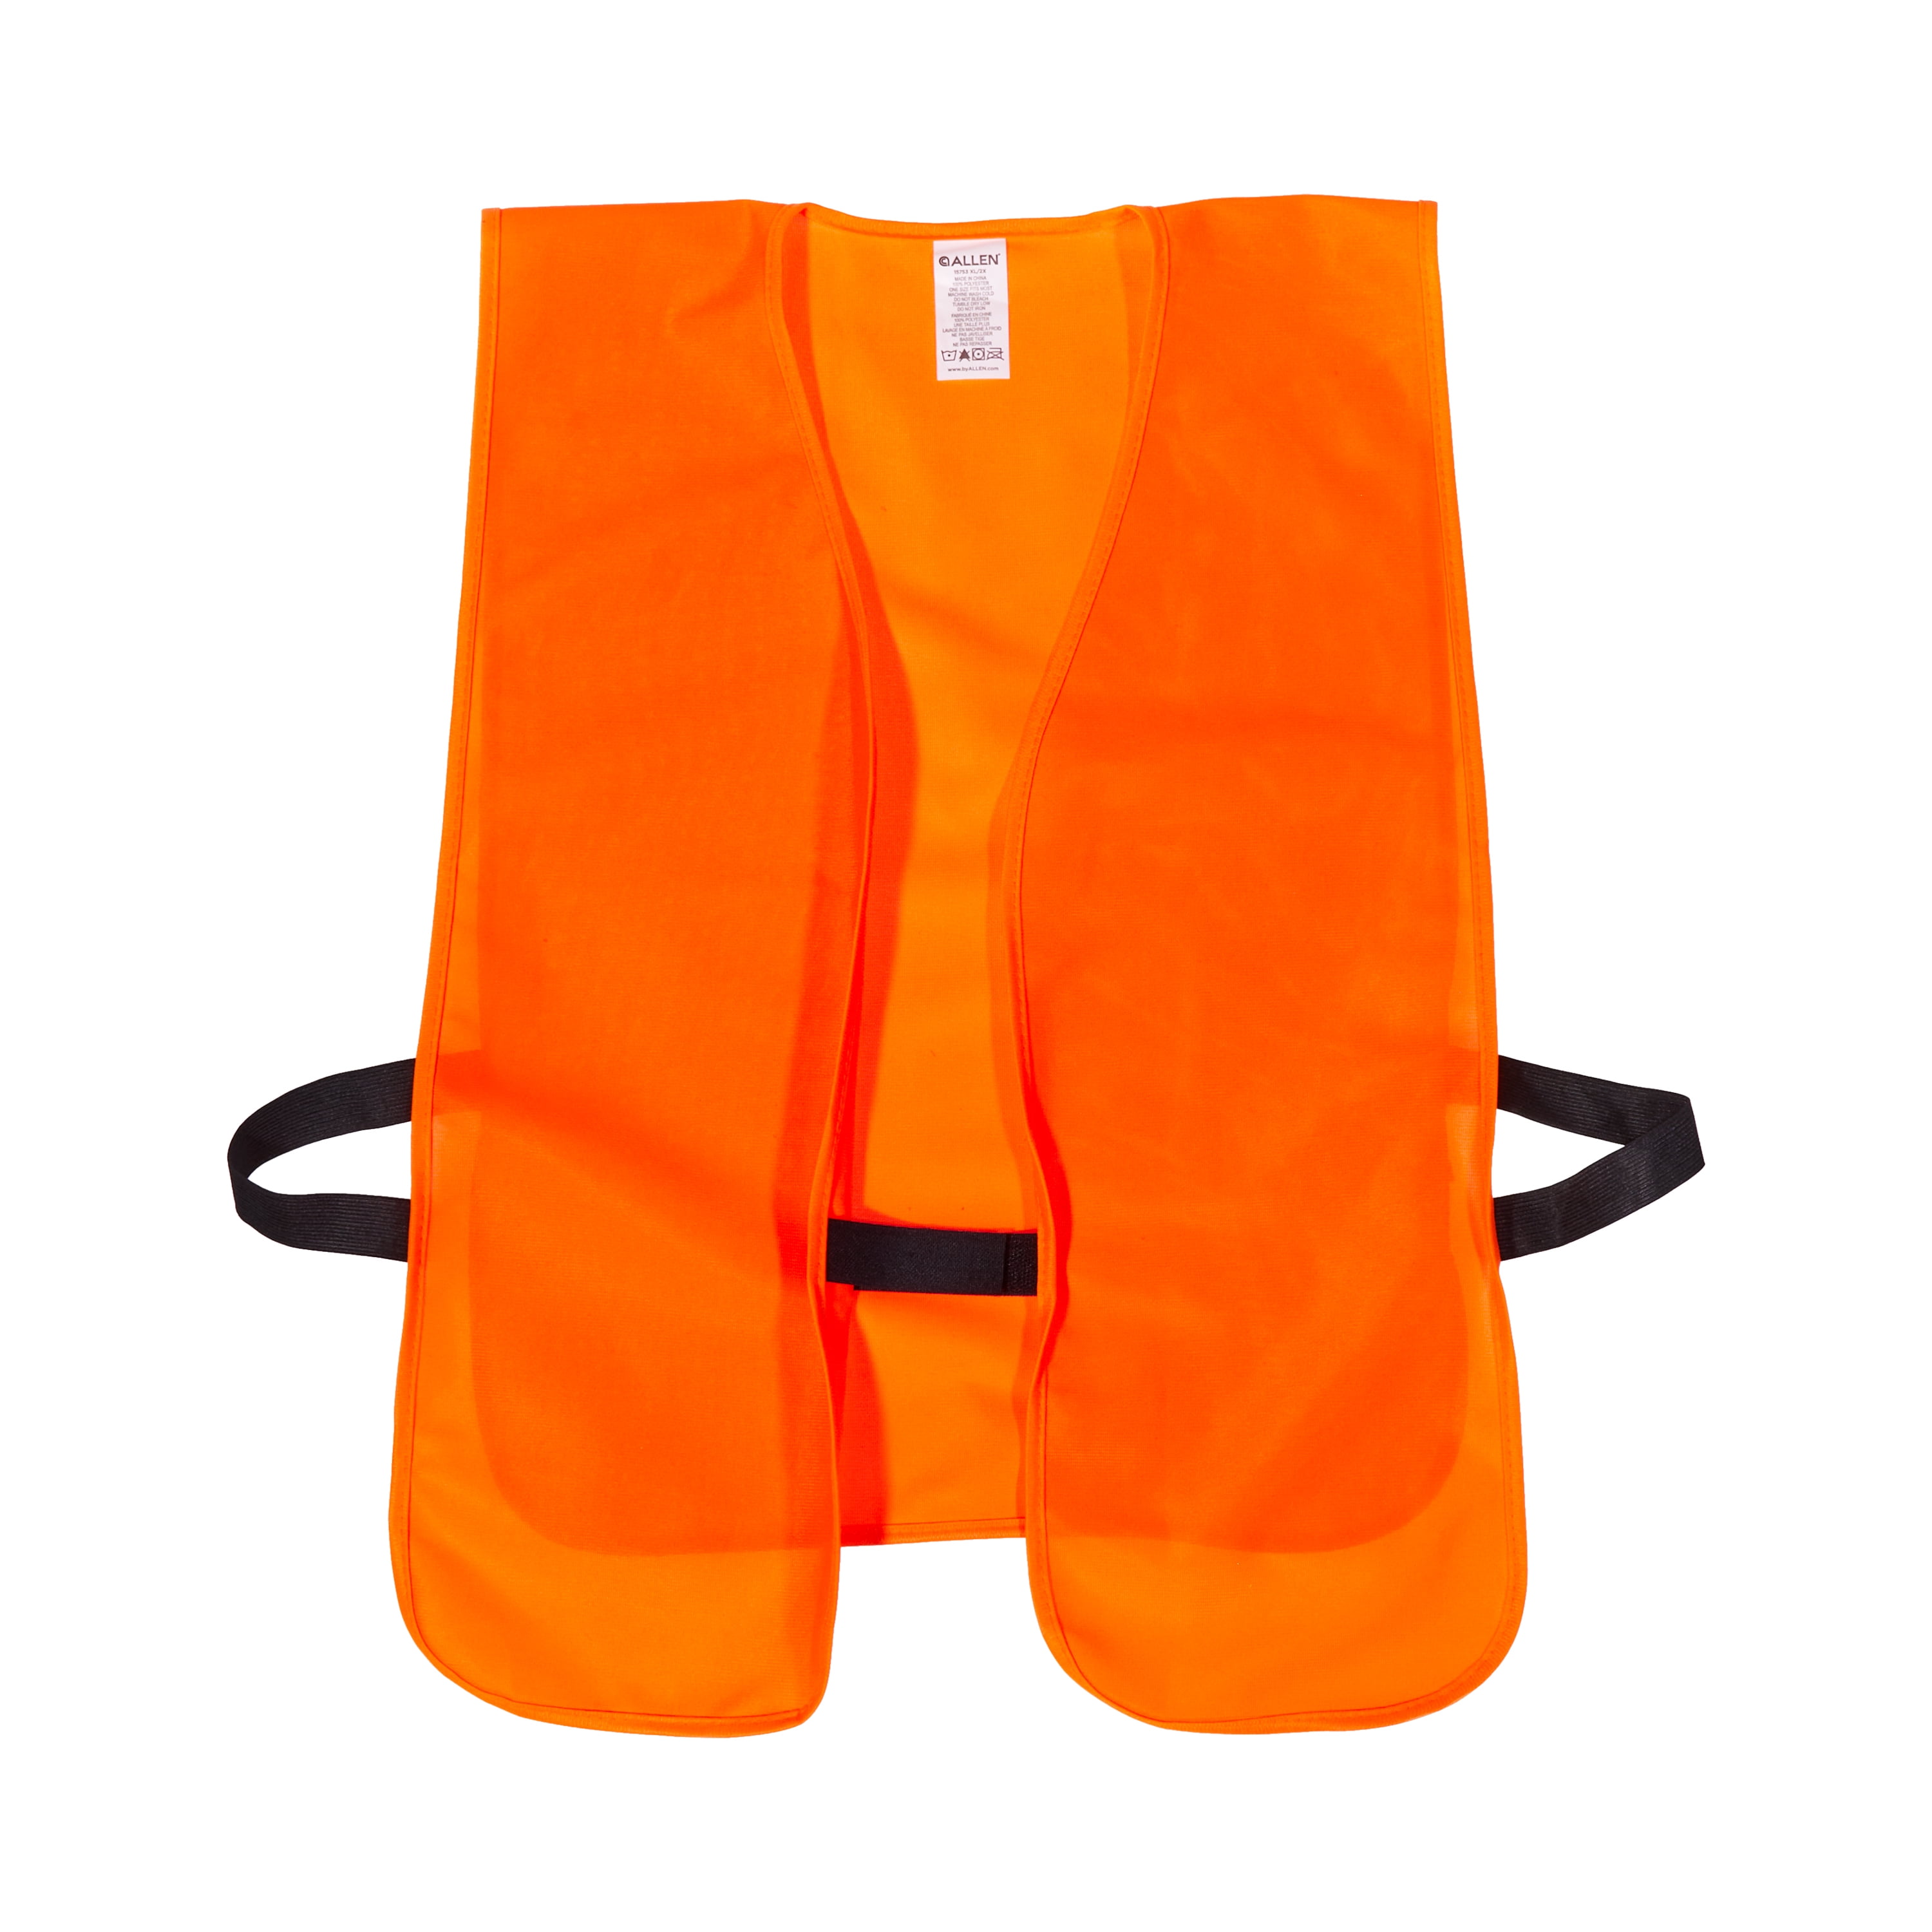 XL Adult Big Man Blaze Orange Hunting/Safety Vest Small 26-36/38-48 / Up to 60 Inch Chest Size Allen Company Adult Men/Women Youth Fits Chest Size Medium Extra Large 